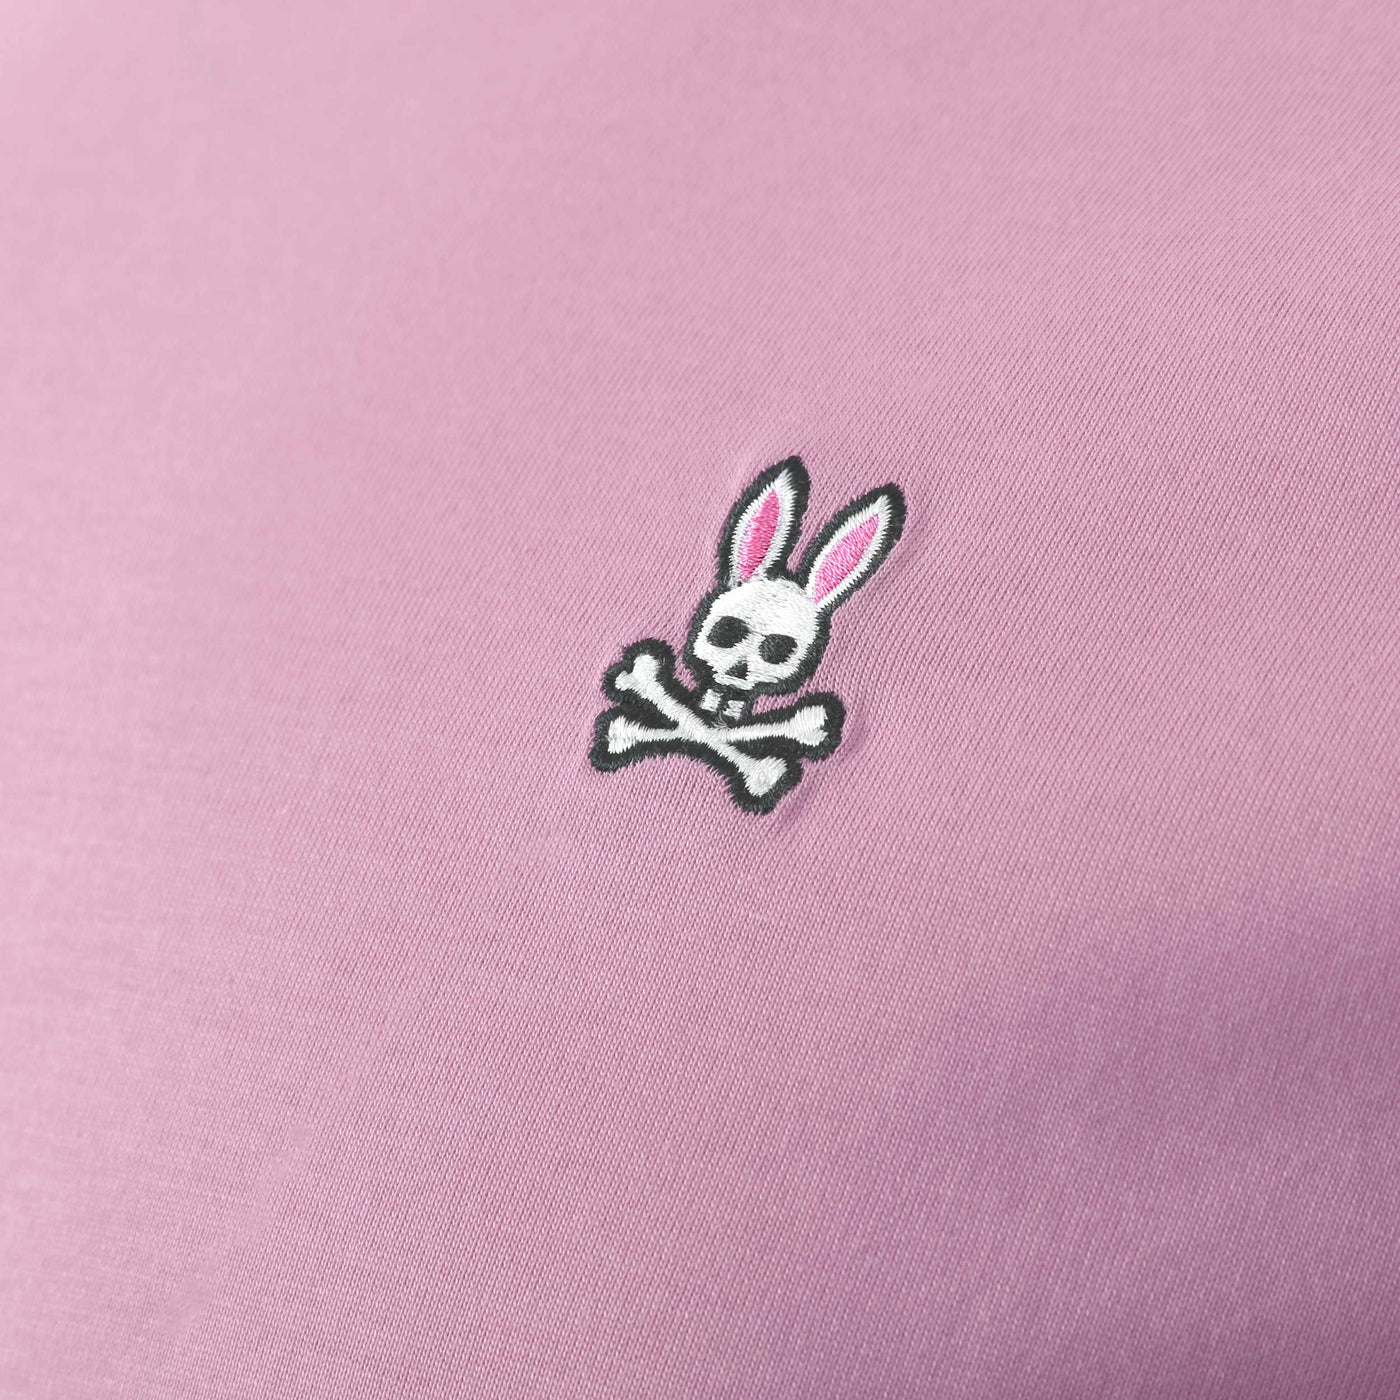 Psycho Bunny Classic T-Shirt in Pink